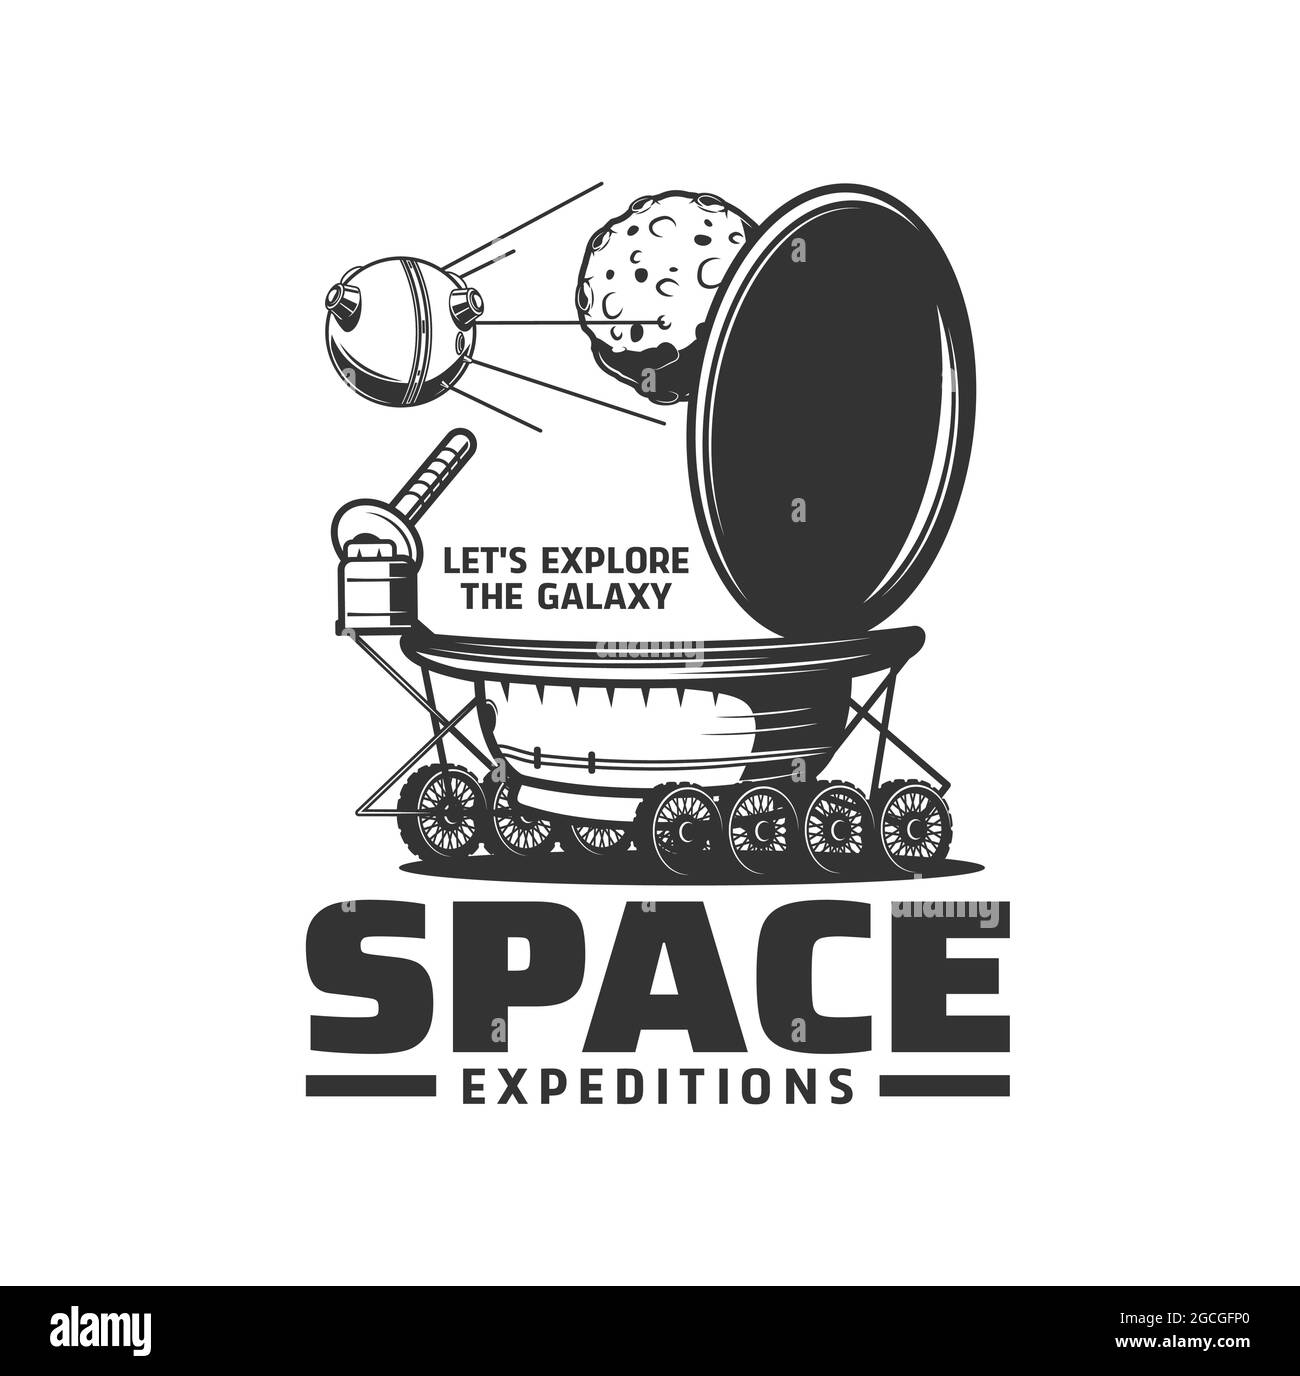 Space expedition isolated vector icon with galaxy universe Moon planet, lunar rover and satellite. Battery powered space exploration vehicle or roving Stock Vector